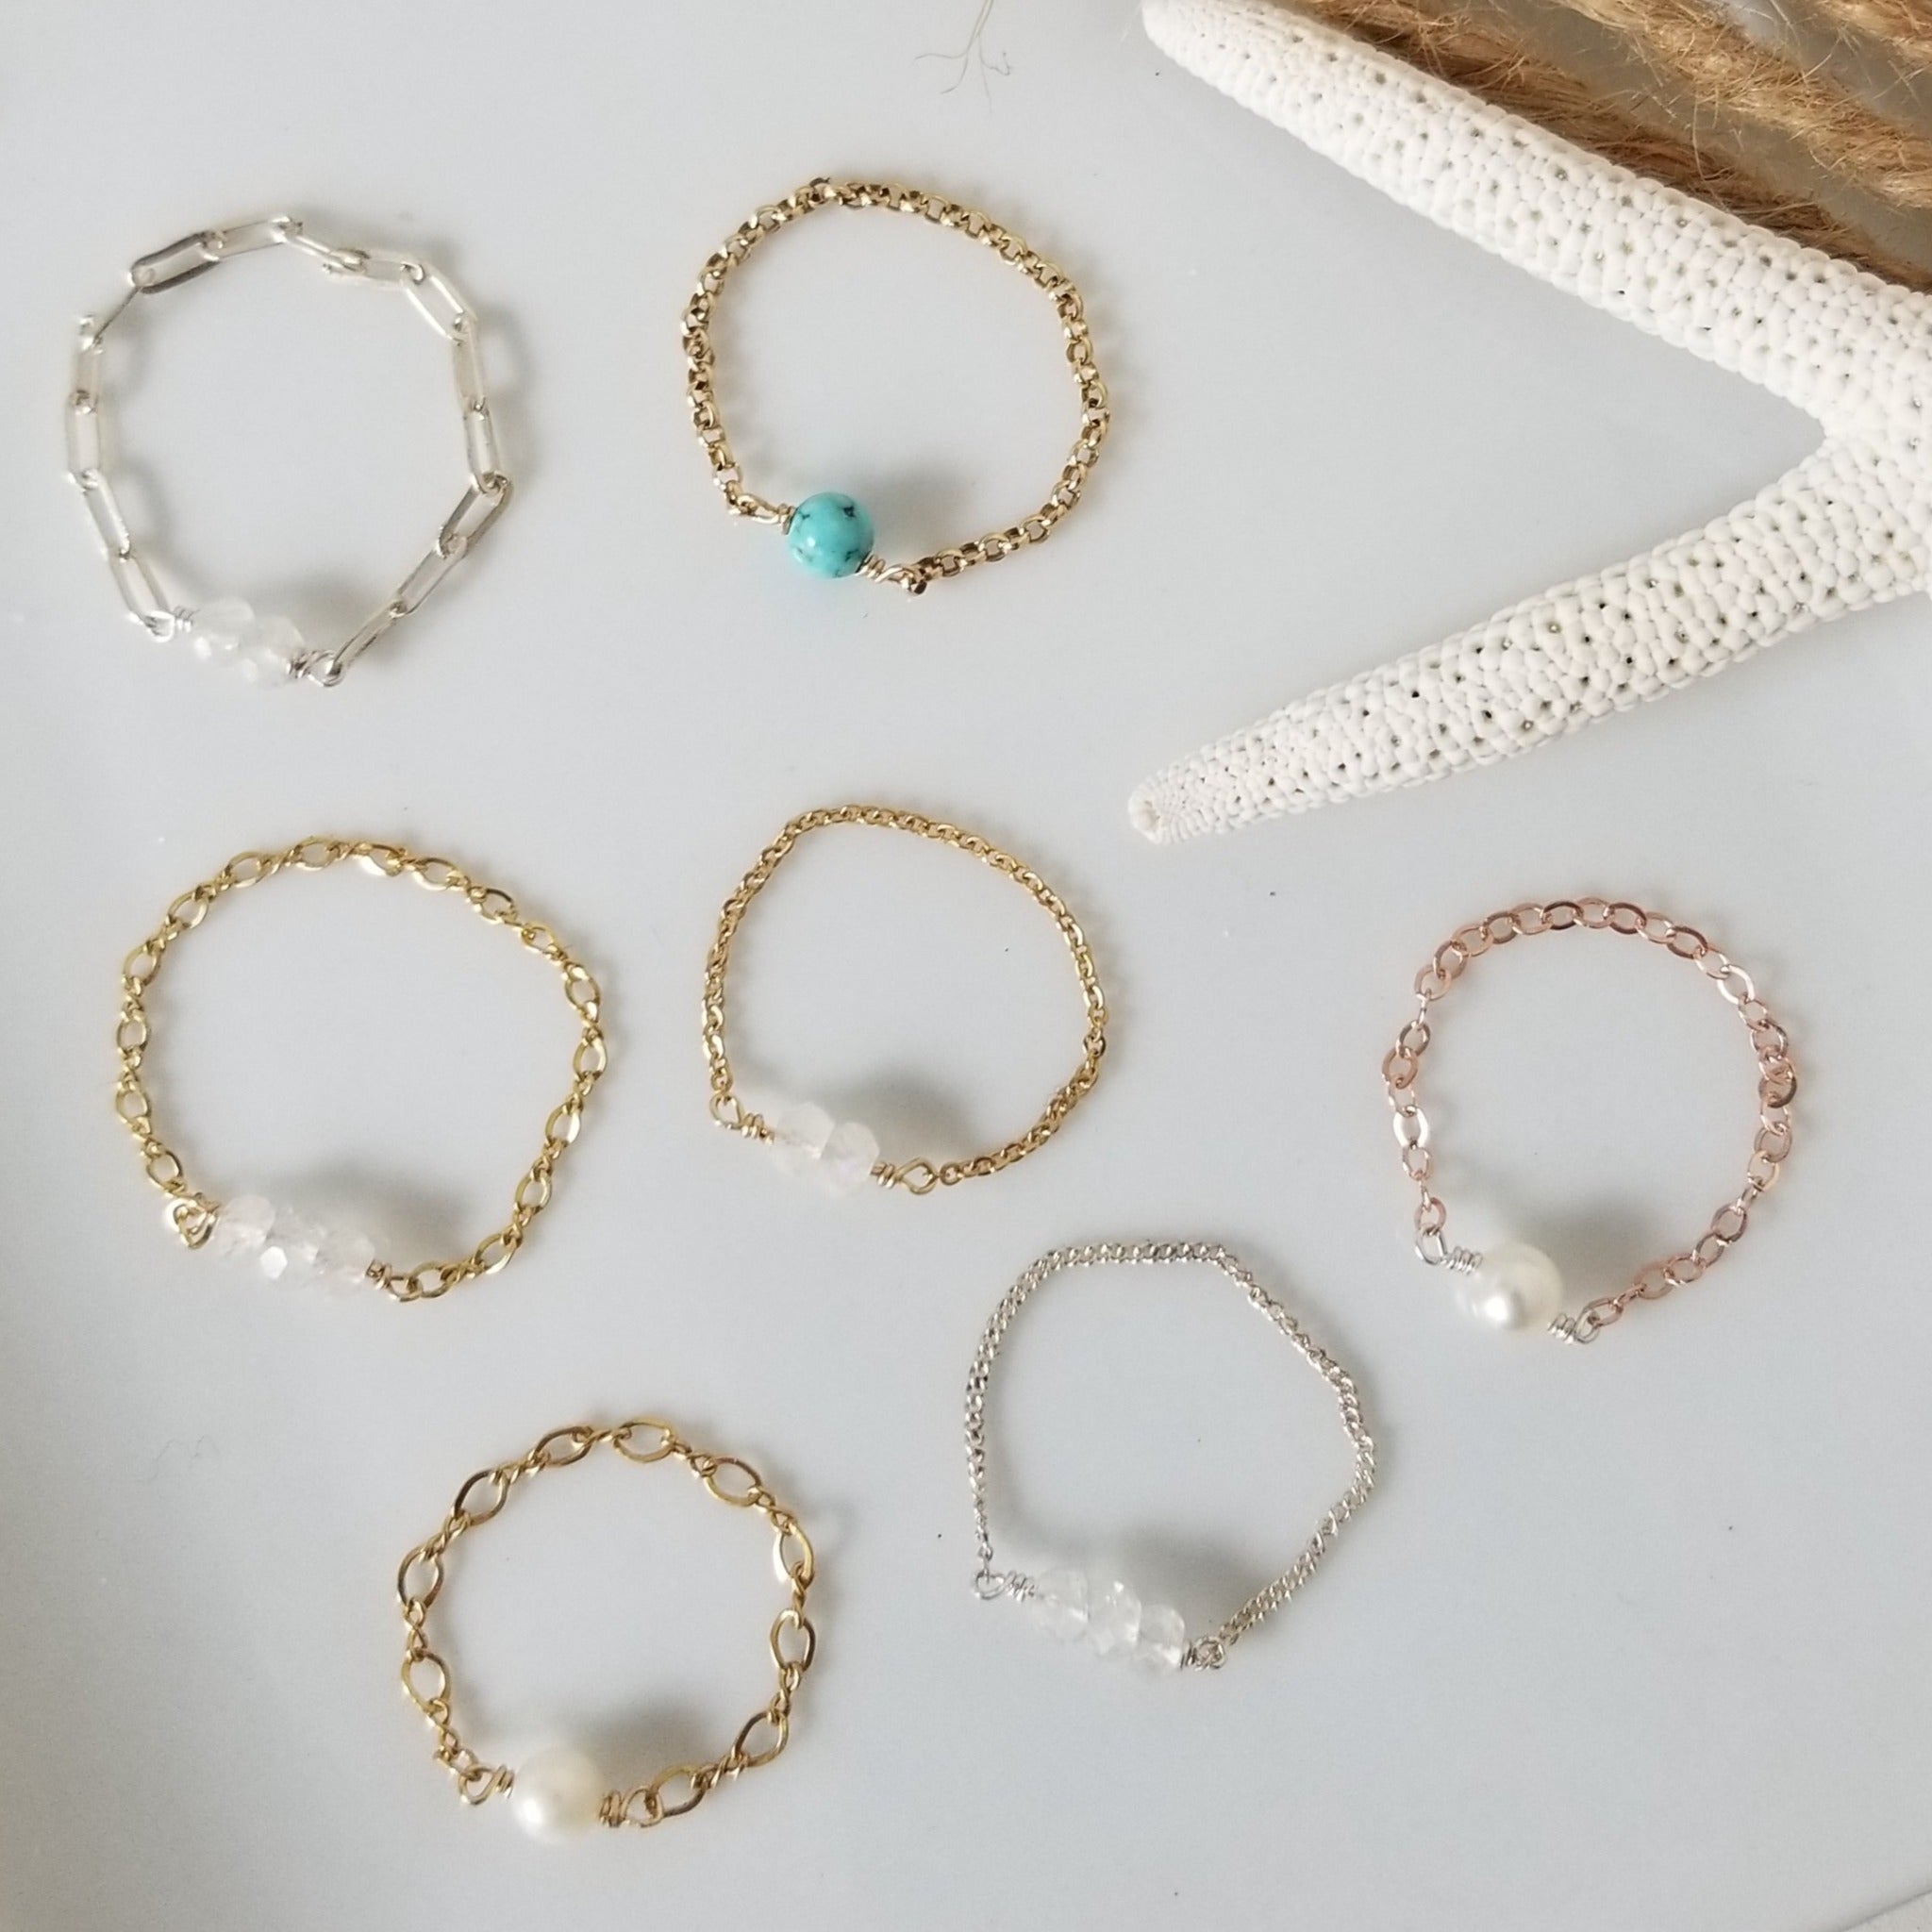 Dainty Natural Stone Chain Ring - Sterling, Gold or Rose Gold